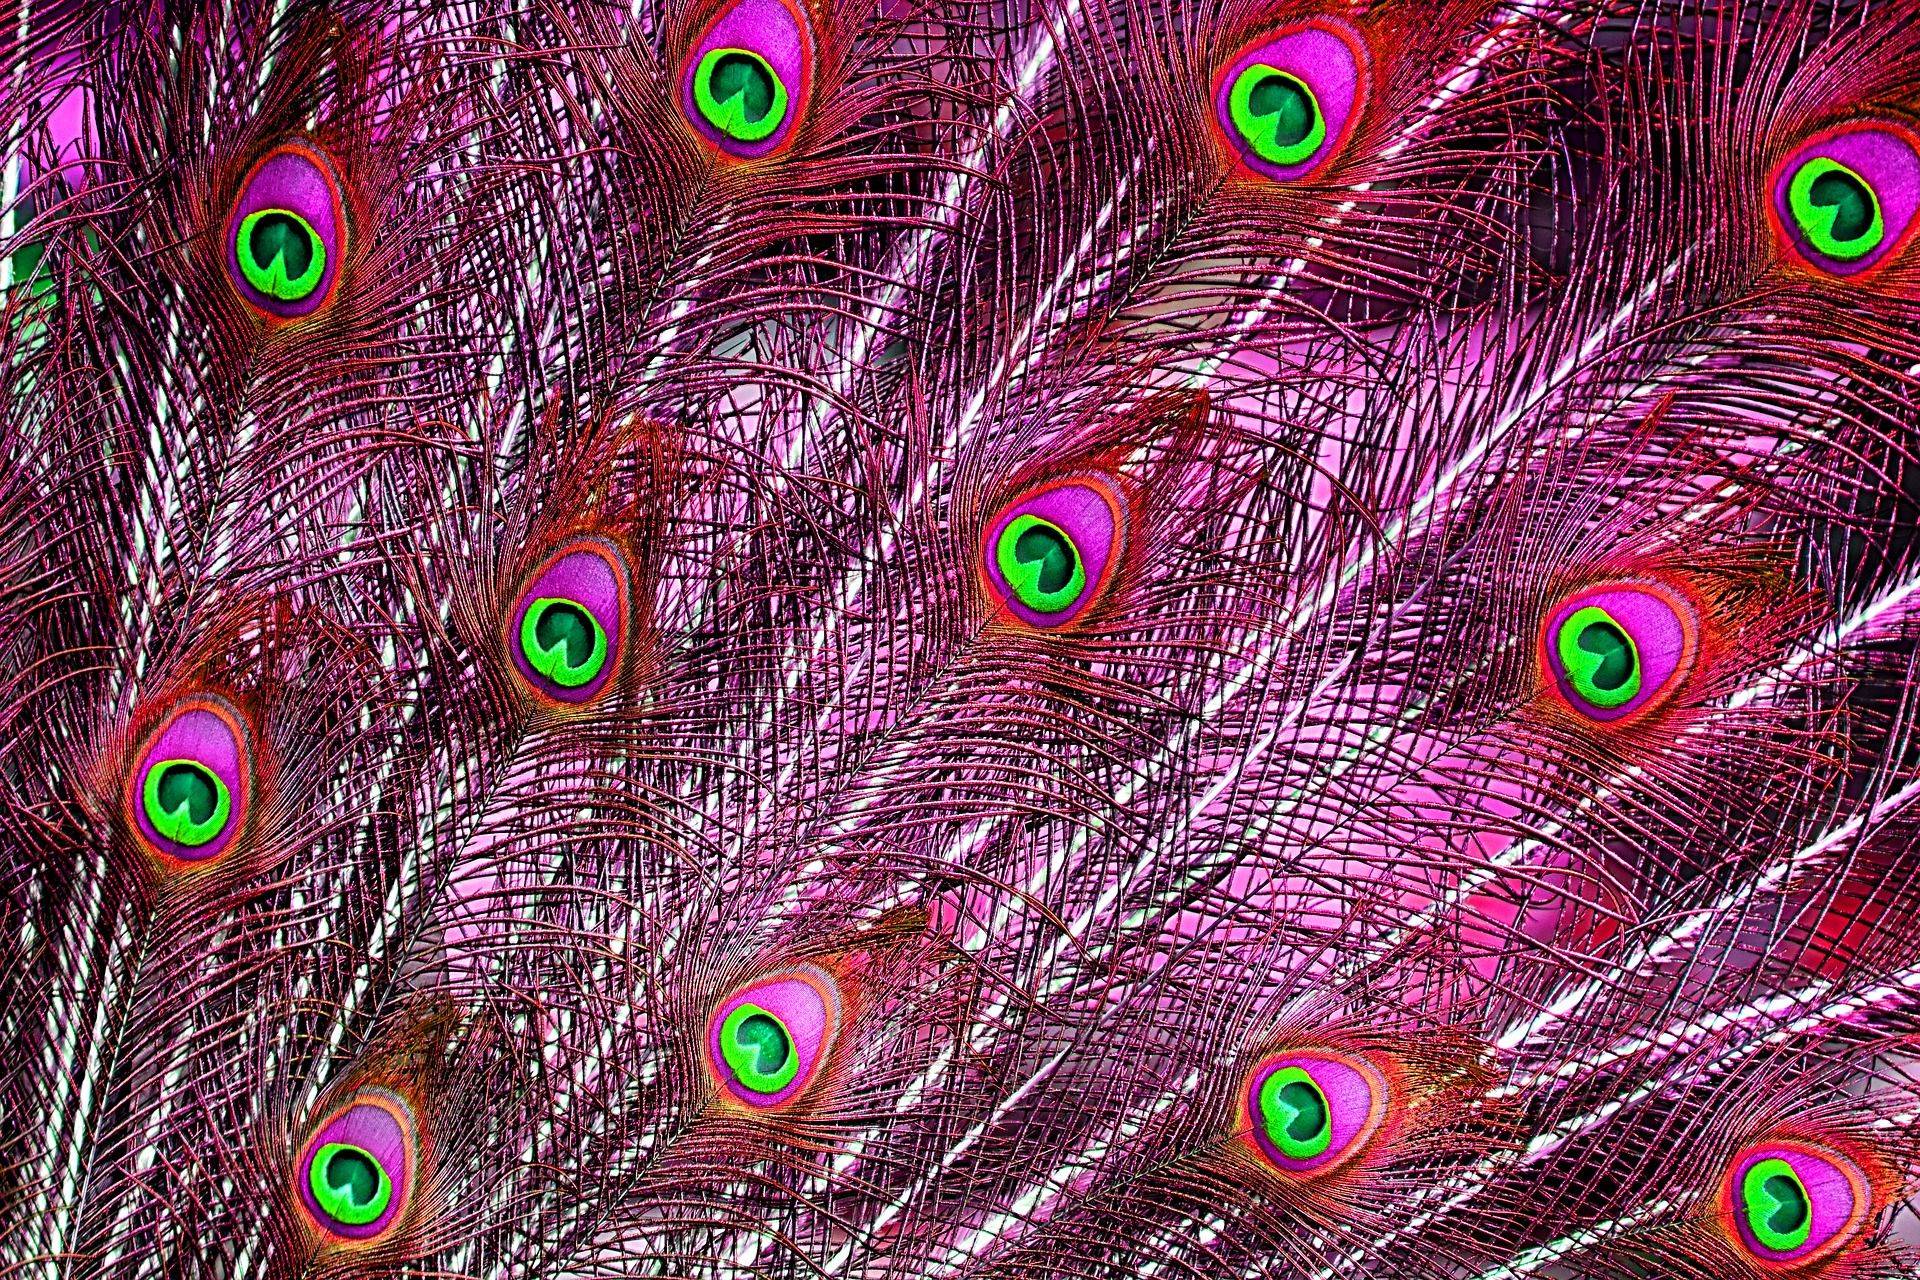 Peacock Feathers Wallpaper Free HD Download